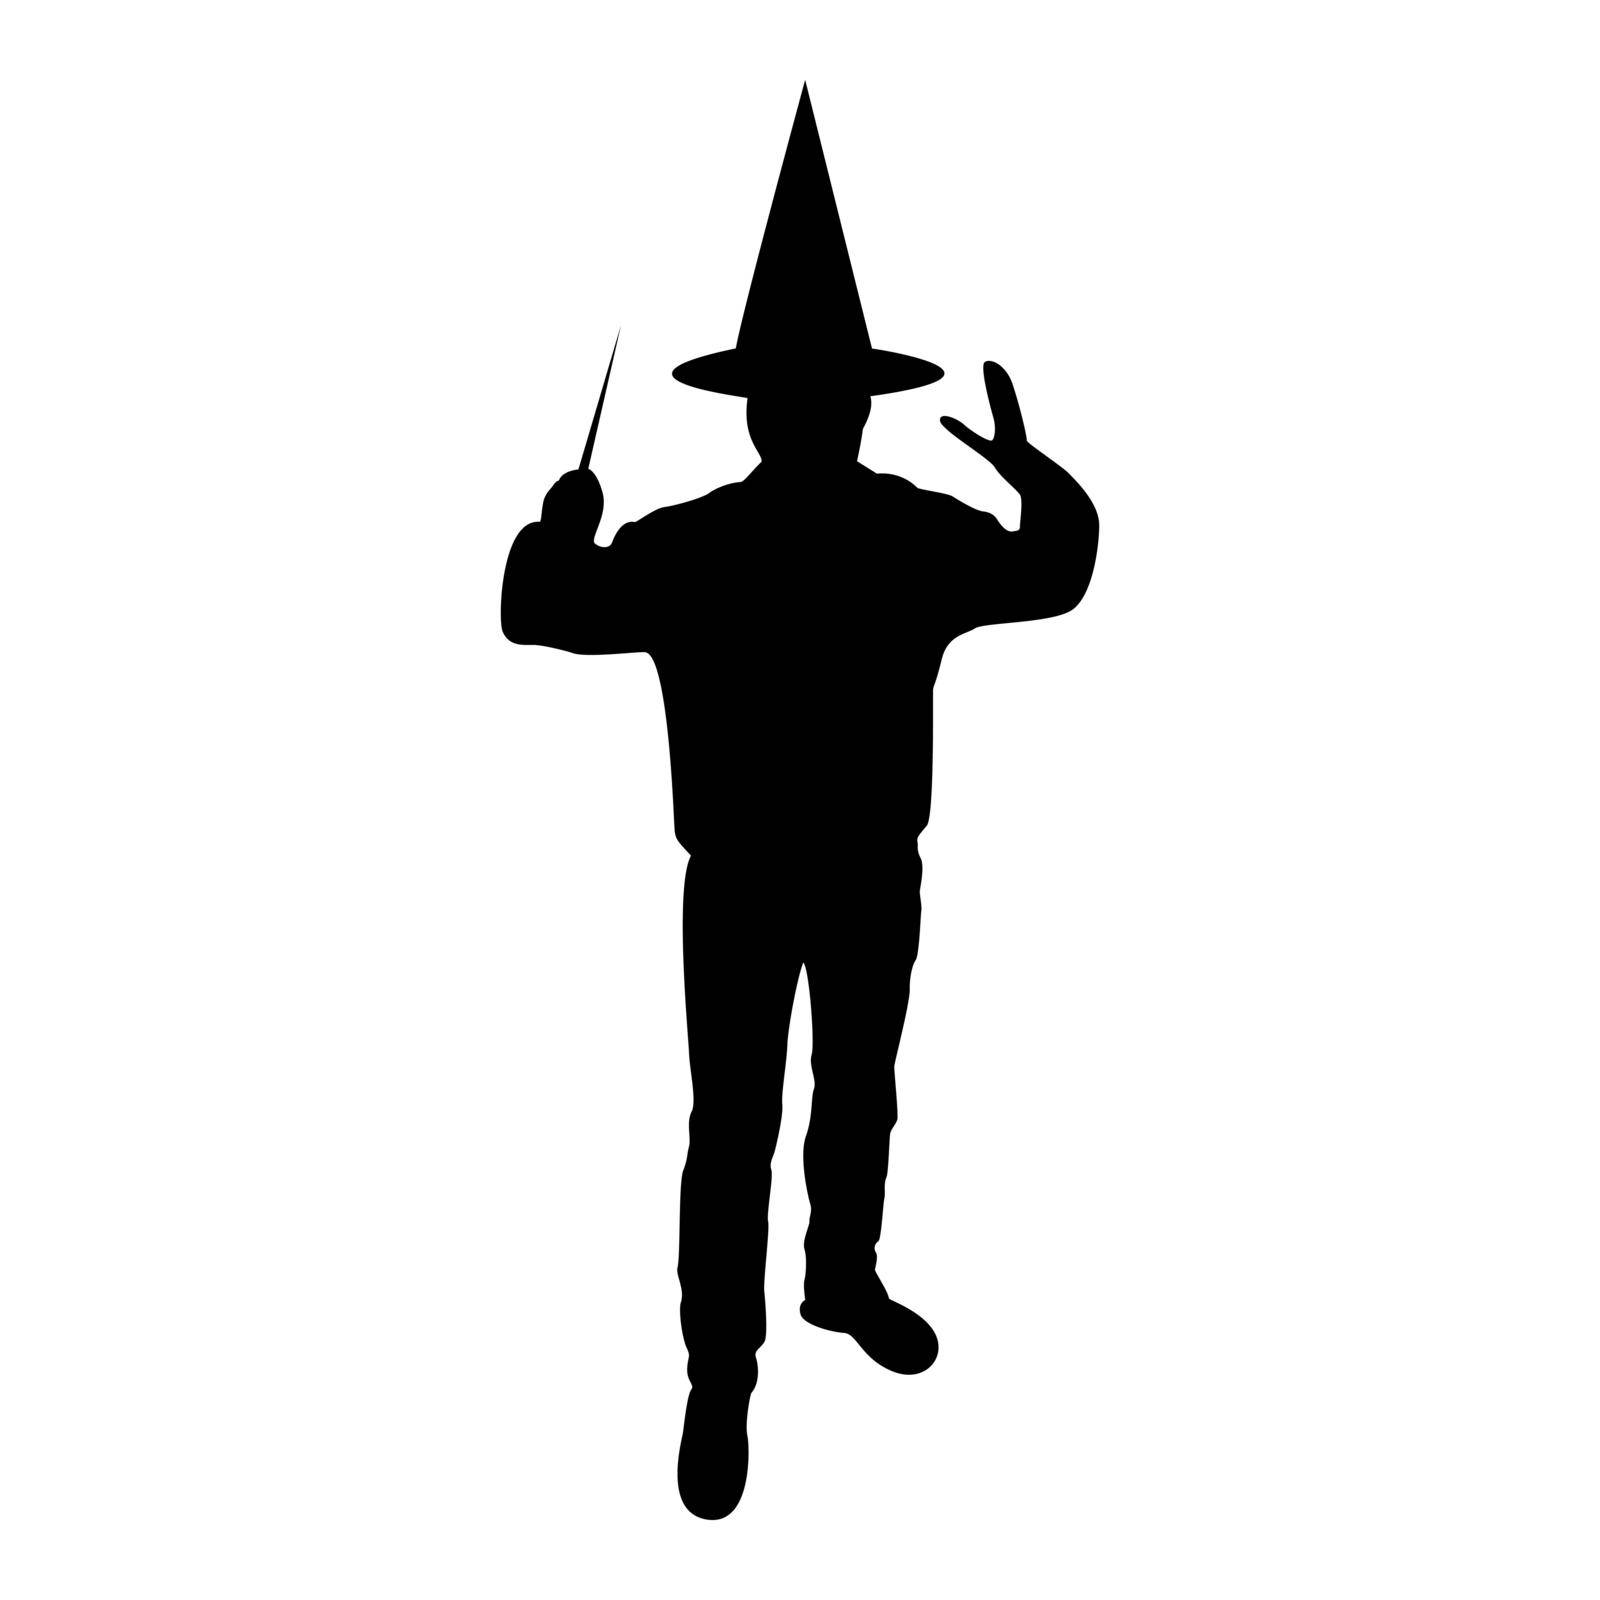 Silhouette wizard holds magic wand trick waving sorcery concept magician sorcerer fantasy person warlock man in robe with magical stick witchcraft in hat mantle mage conjure mystery idea enchantment black color vector illustration flat style image by serhii435